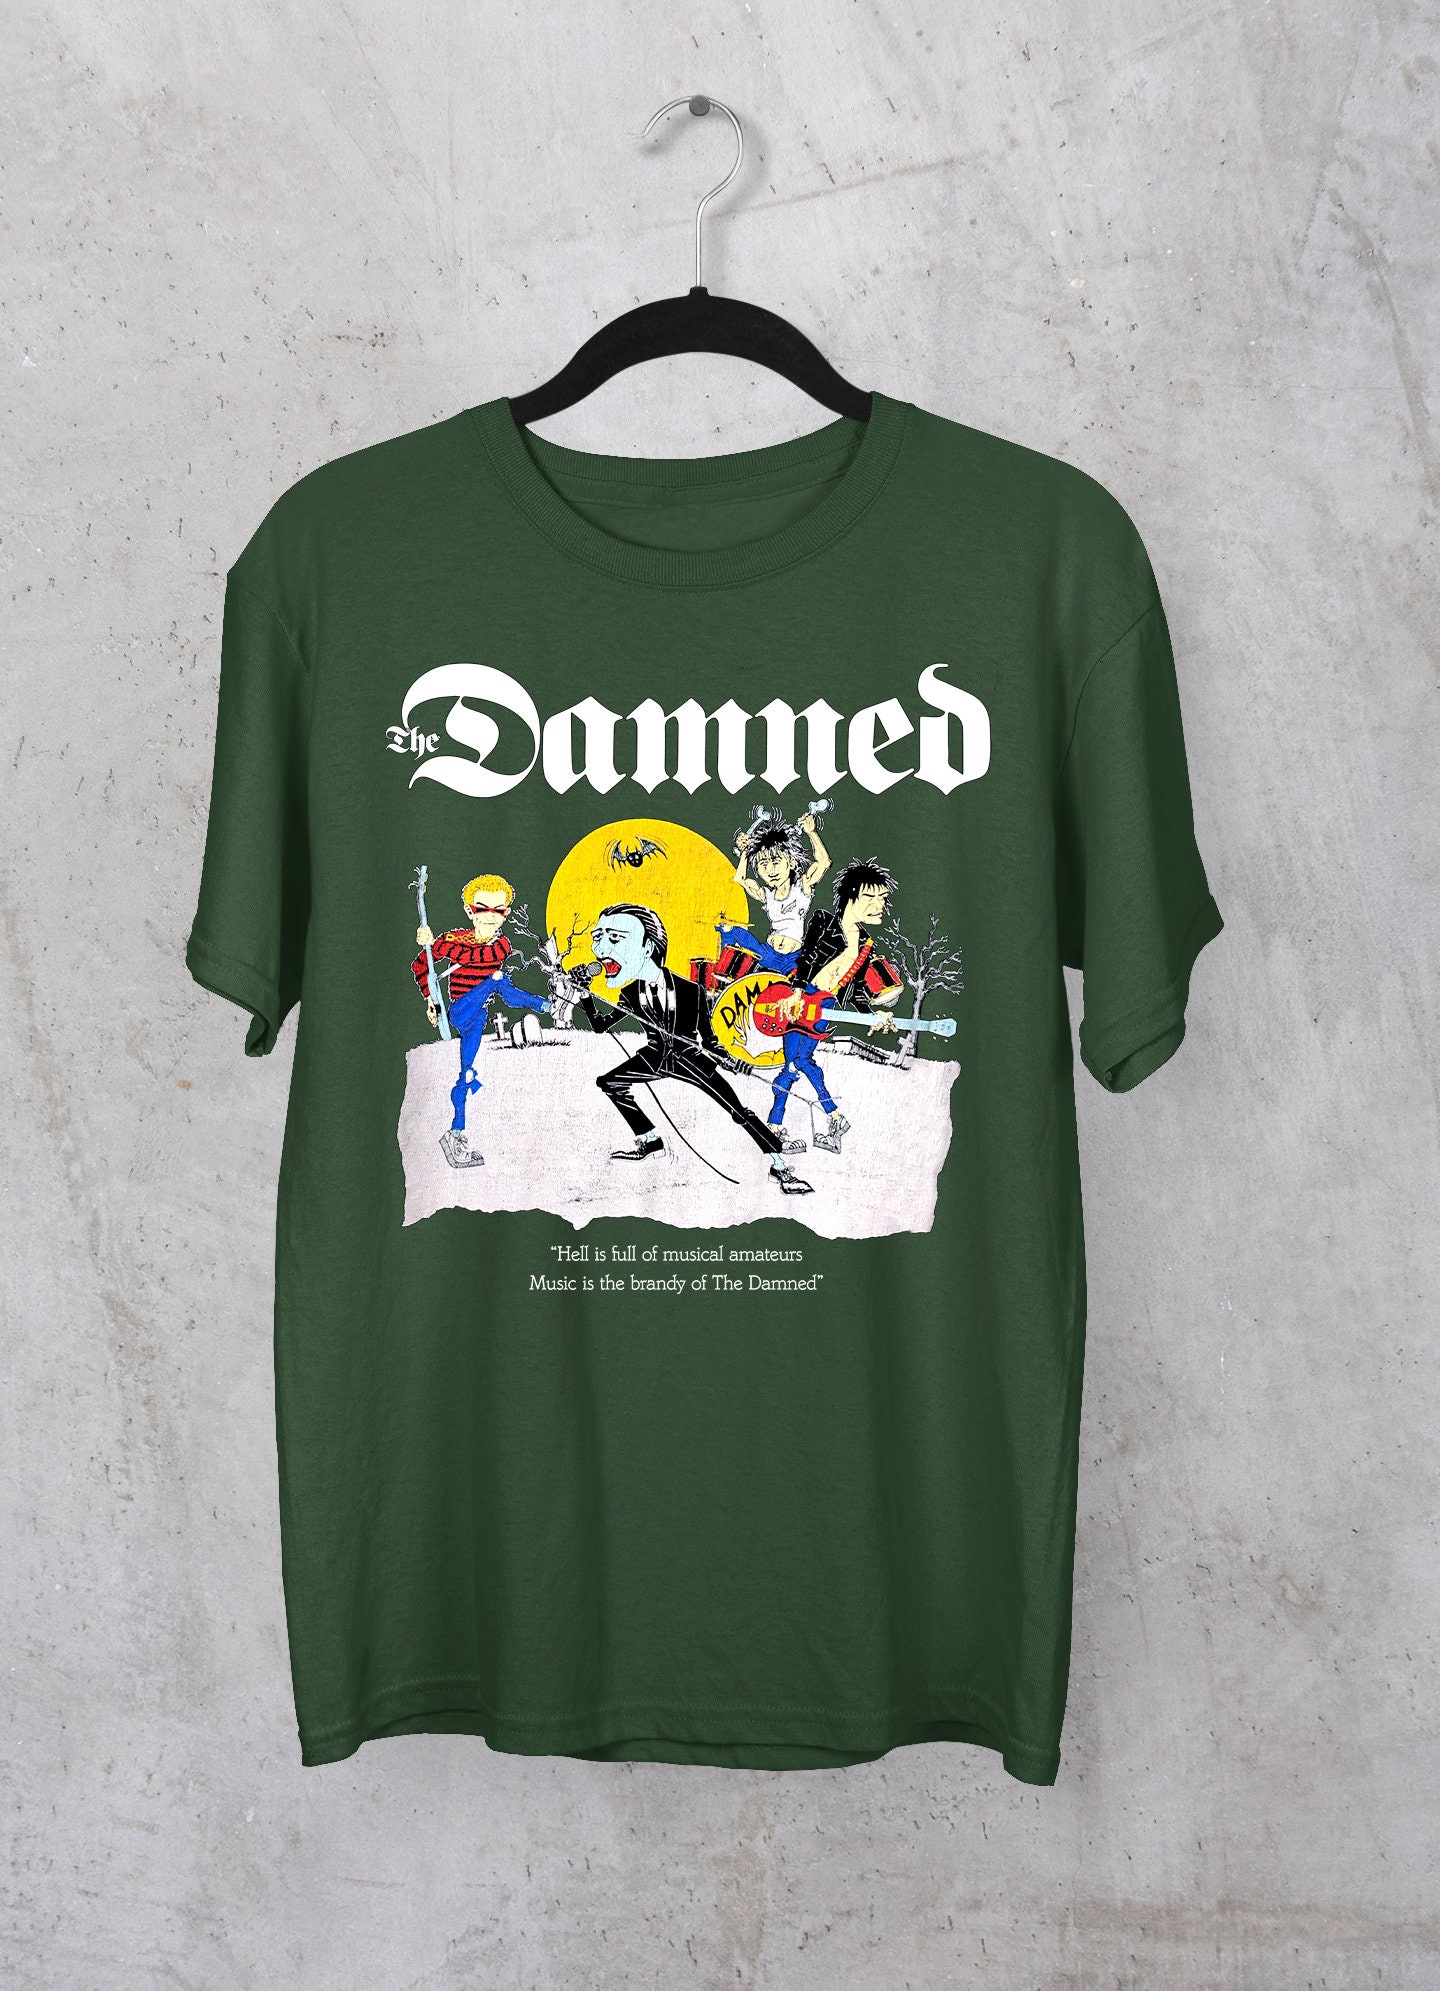 The Damned Tshirt Hell is Full of Musical Amateurs T-shirt Porn Photo Hd